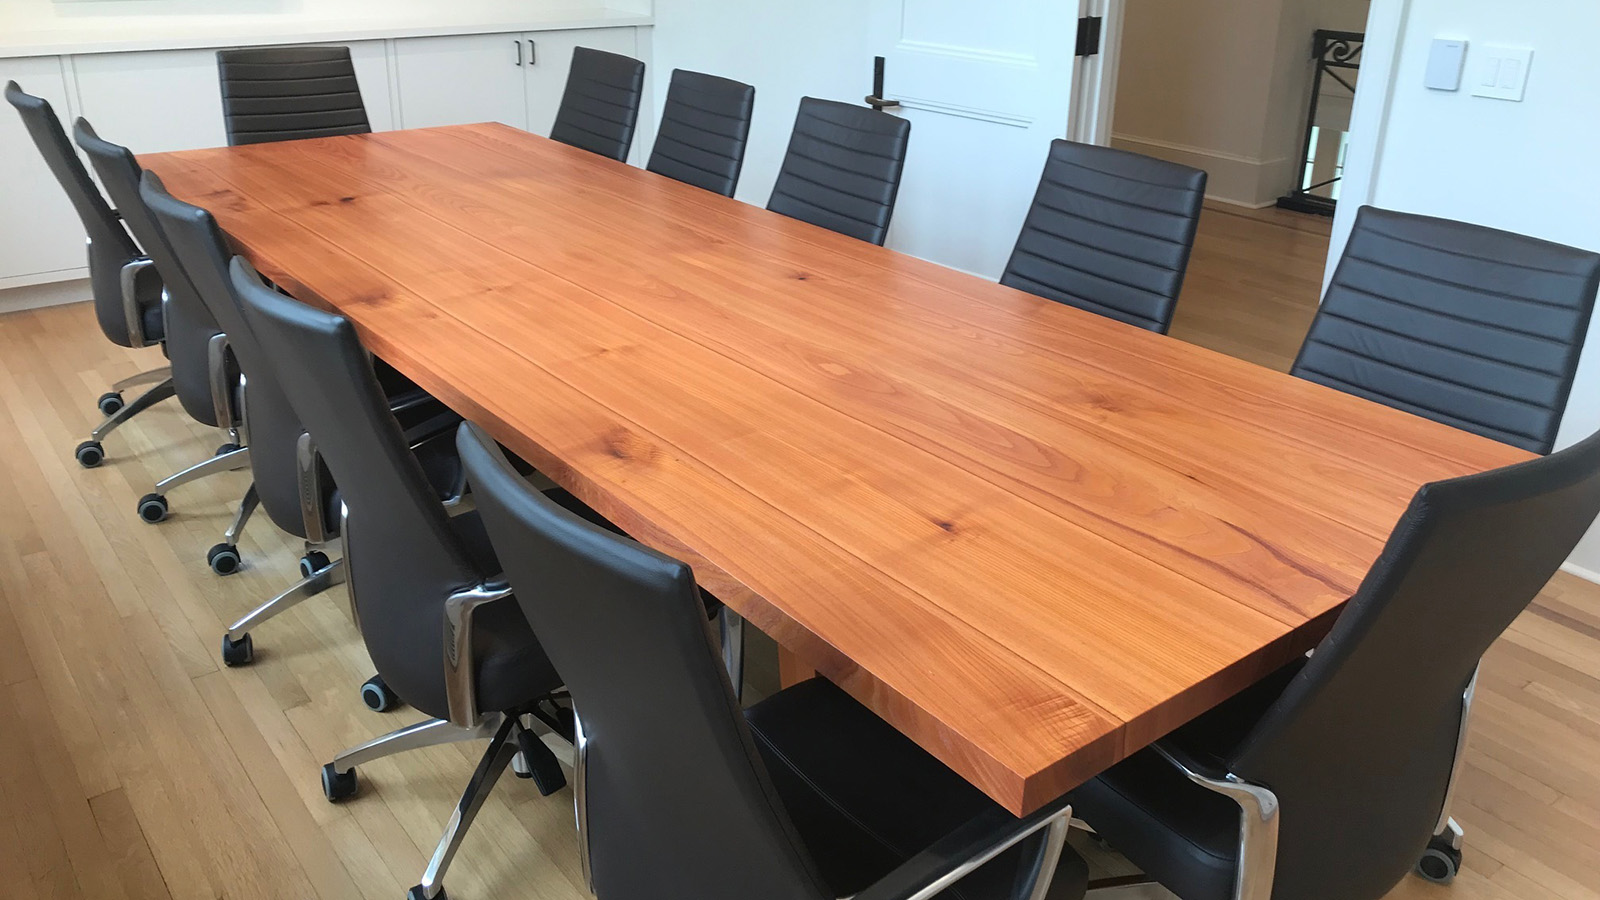 Long wooden conference room table surrounded by black chairs in an office